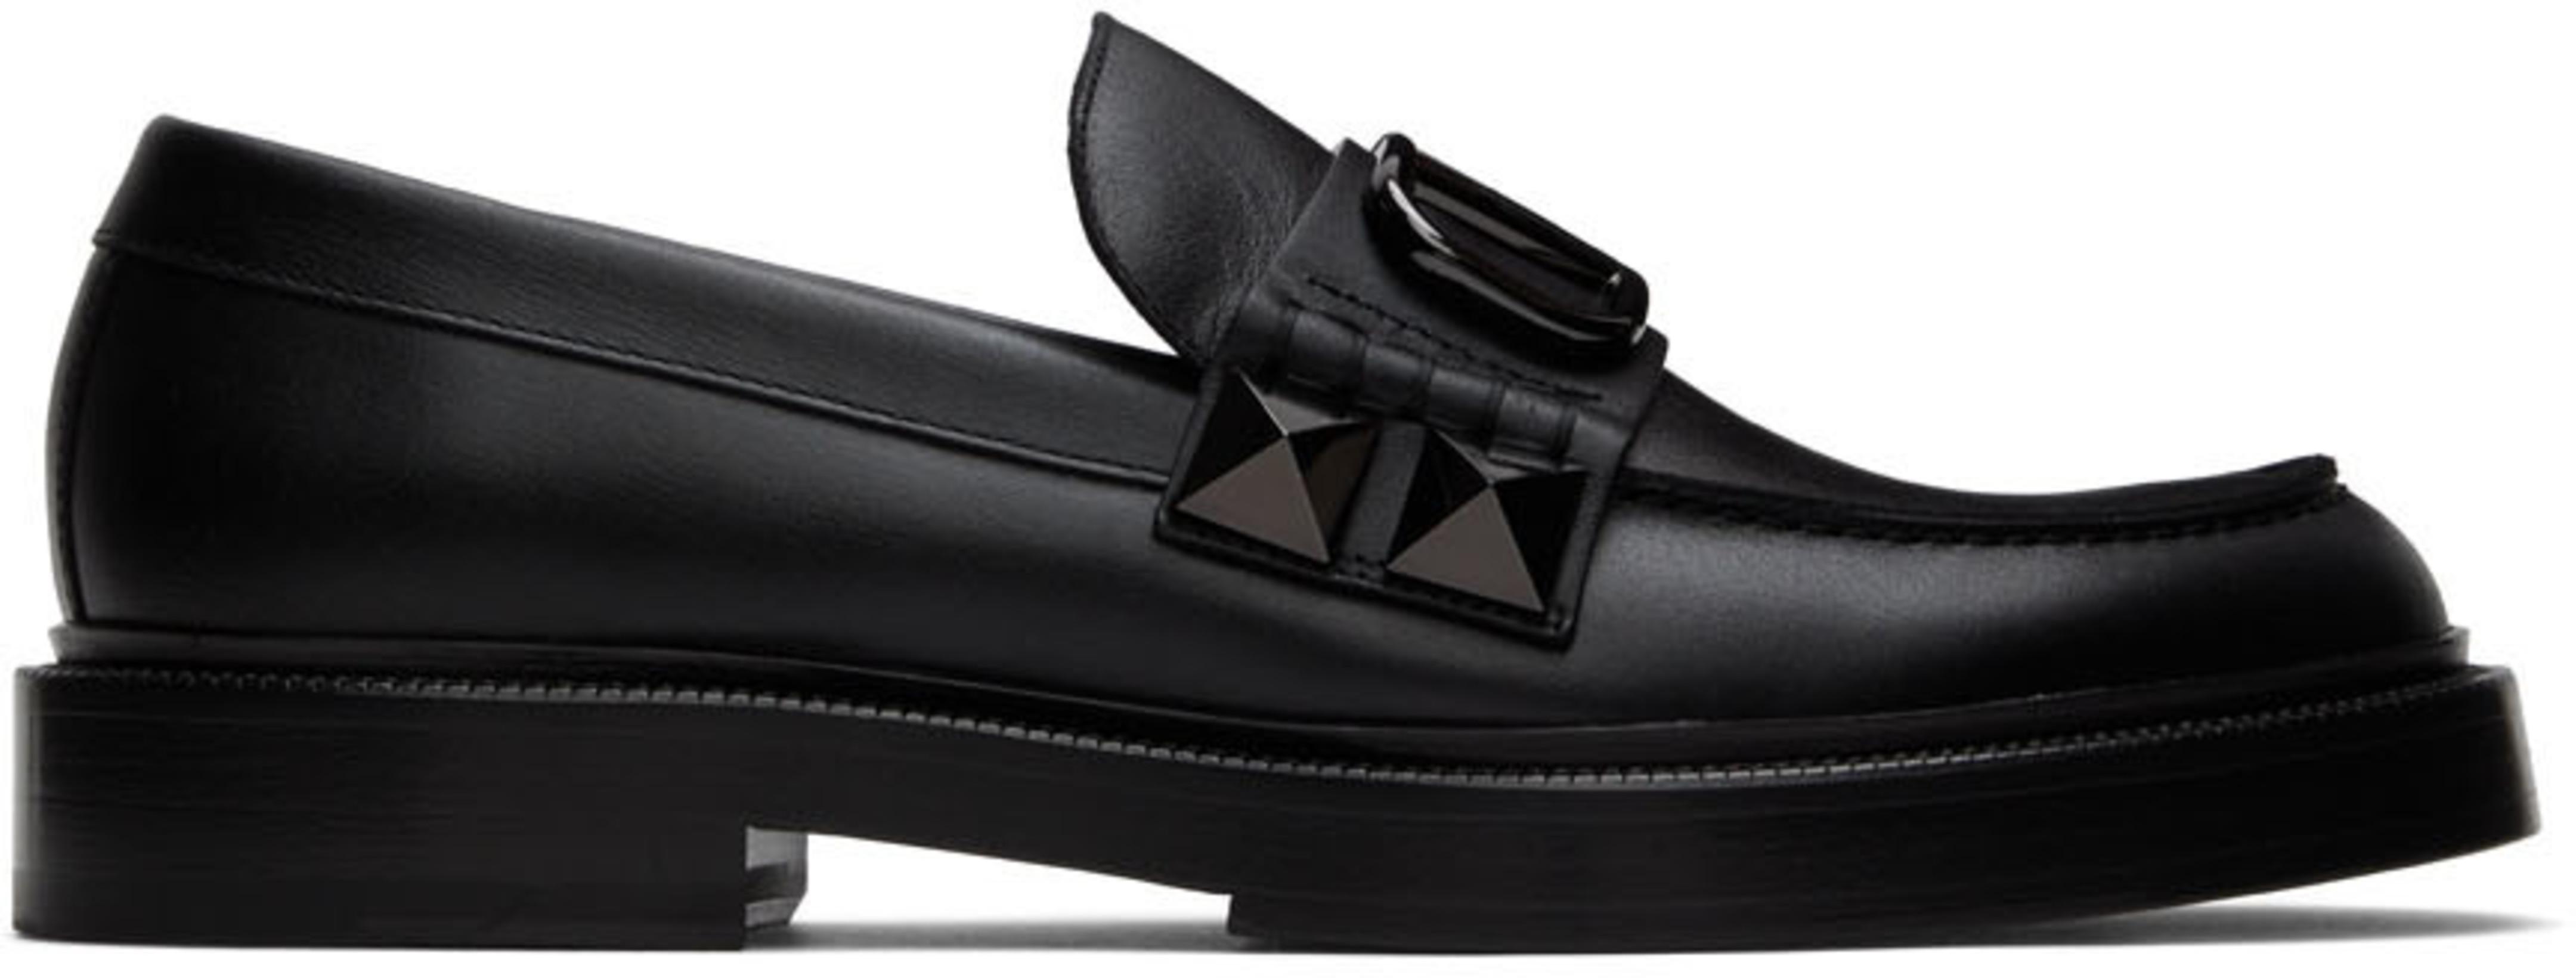 Black Stud Sign Loafers by VALENTINO